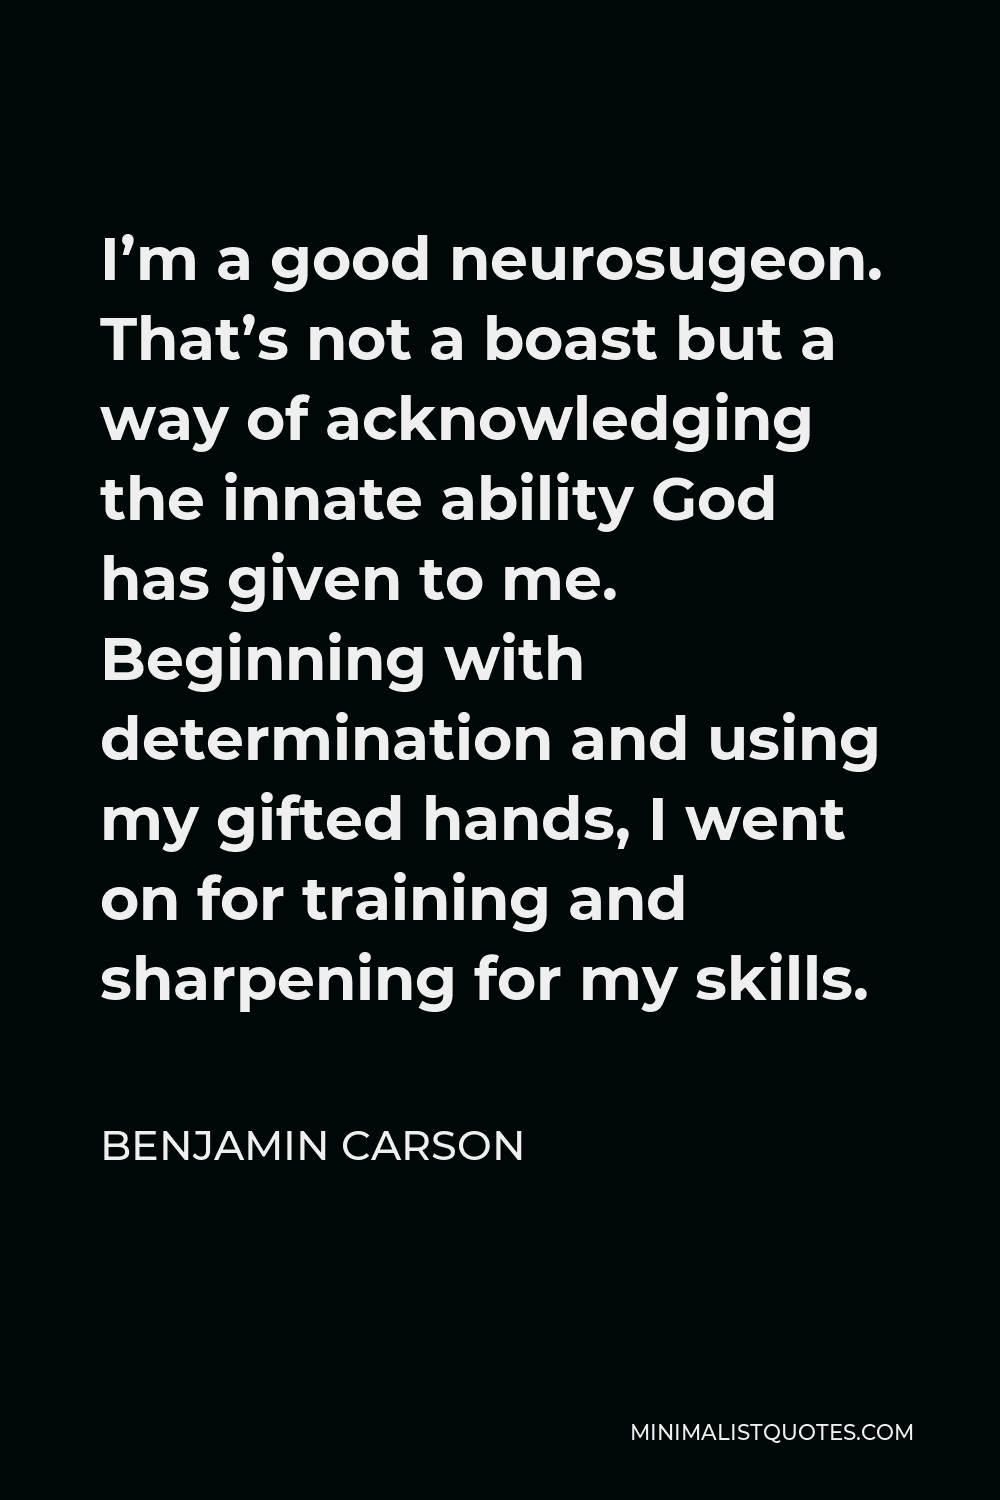 Benjamin Carson Quote - I’m a good neurosugeon. That’s not a boast but a way of acknowledging the innate ability God has given to me. Beginning with determination and using my gifted hands, I went on for training and sharpening for my skills.